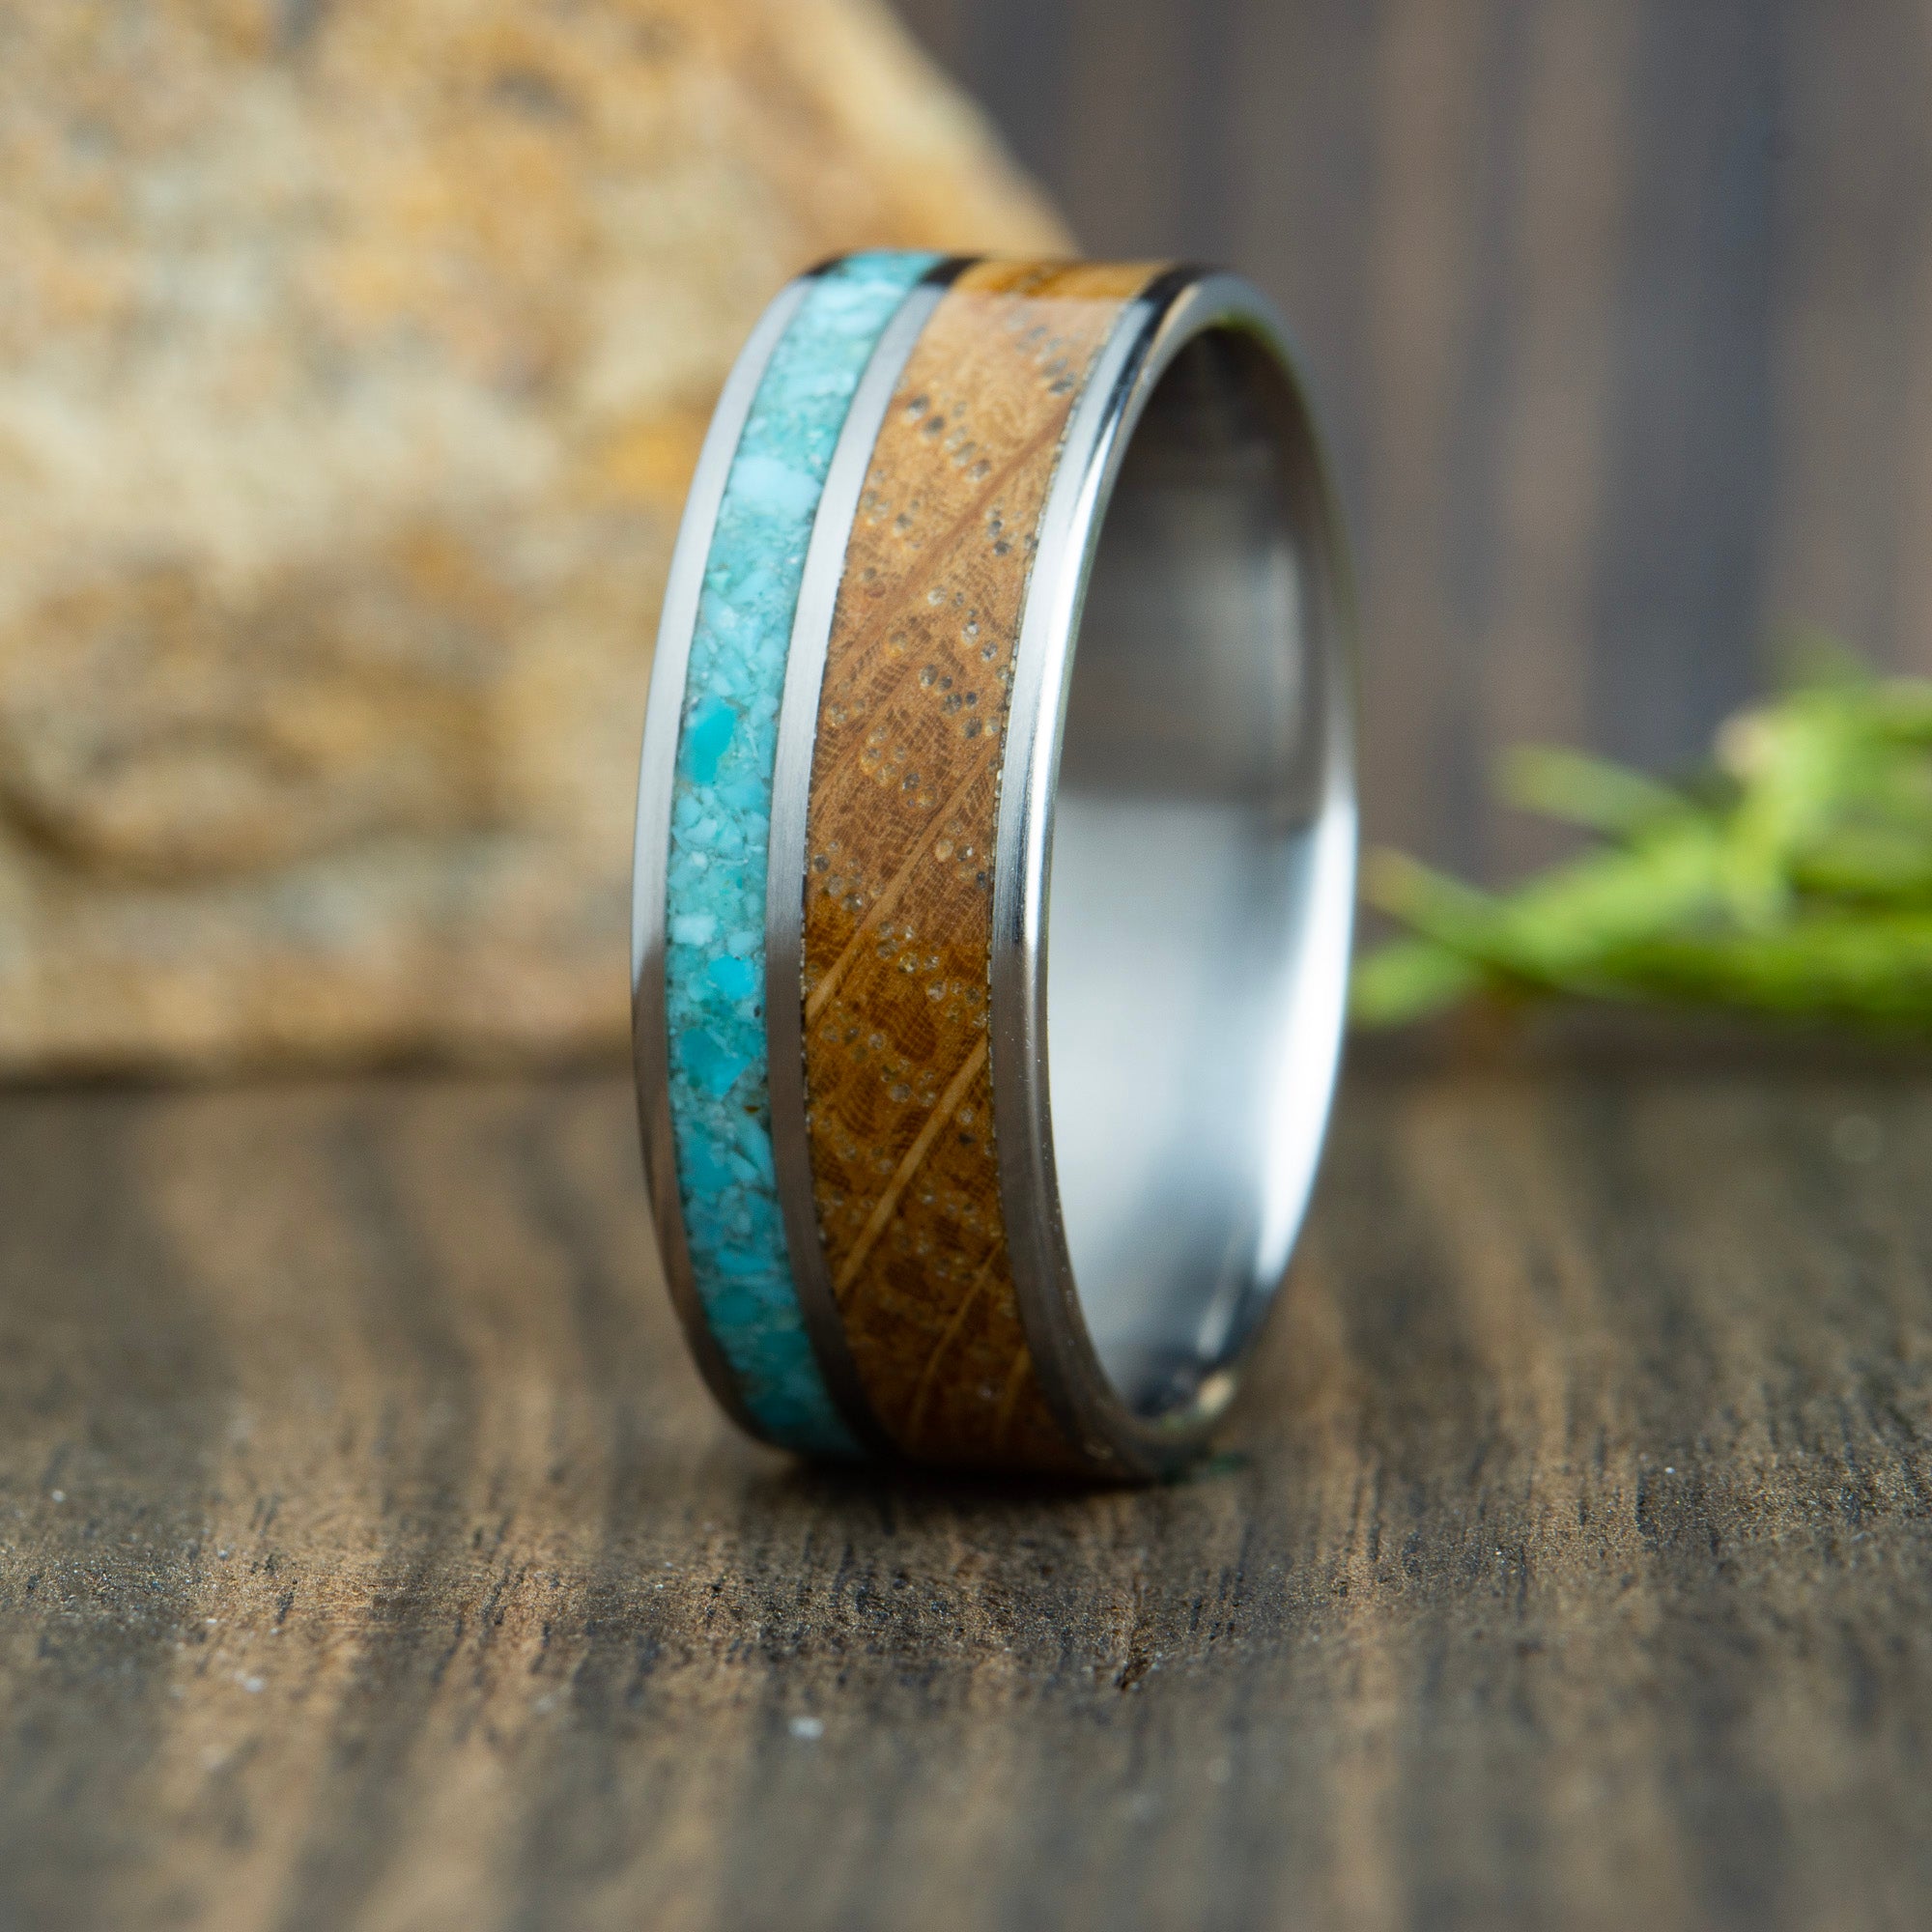 Whiskey barrel mens wedding ring with turquoise